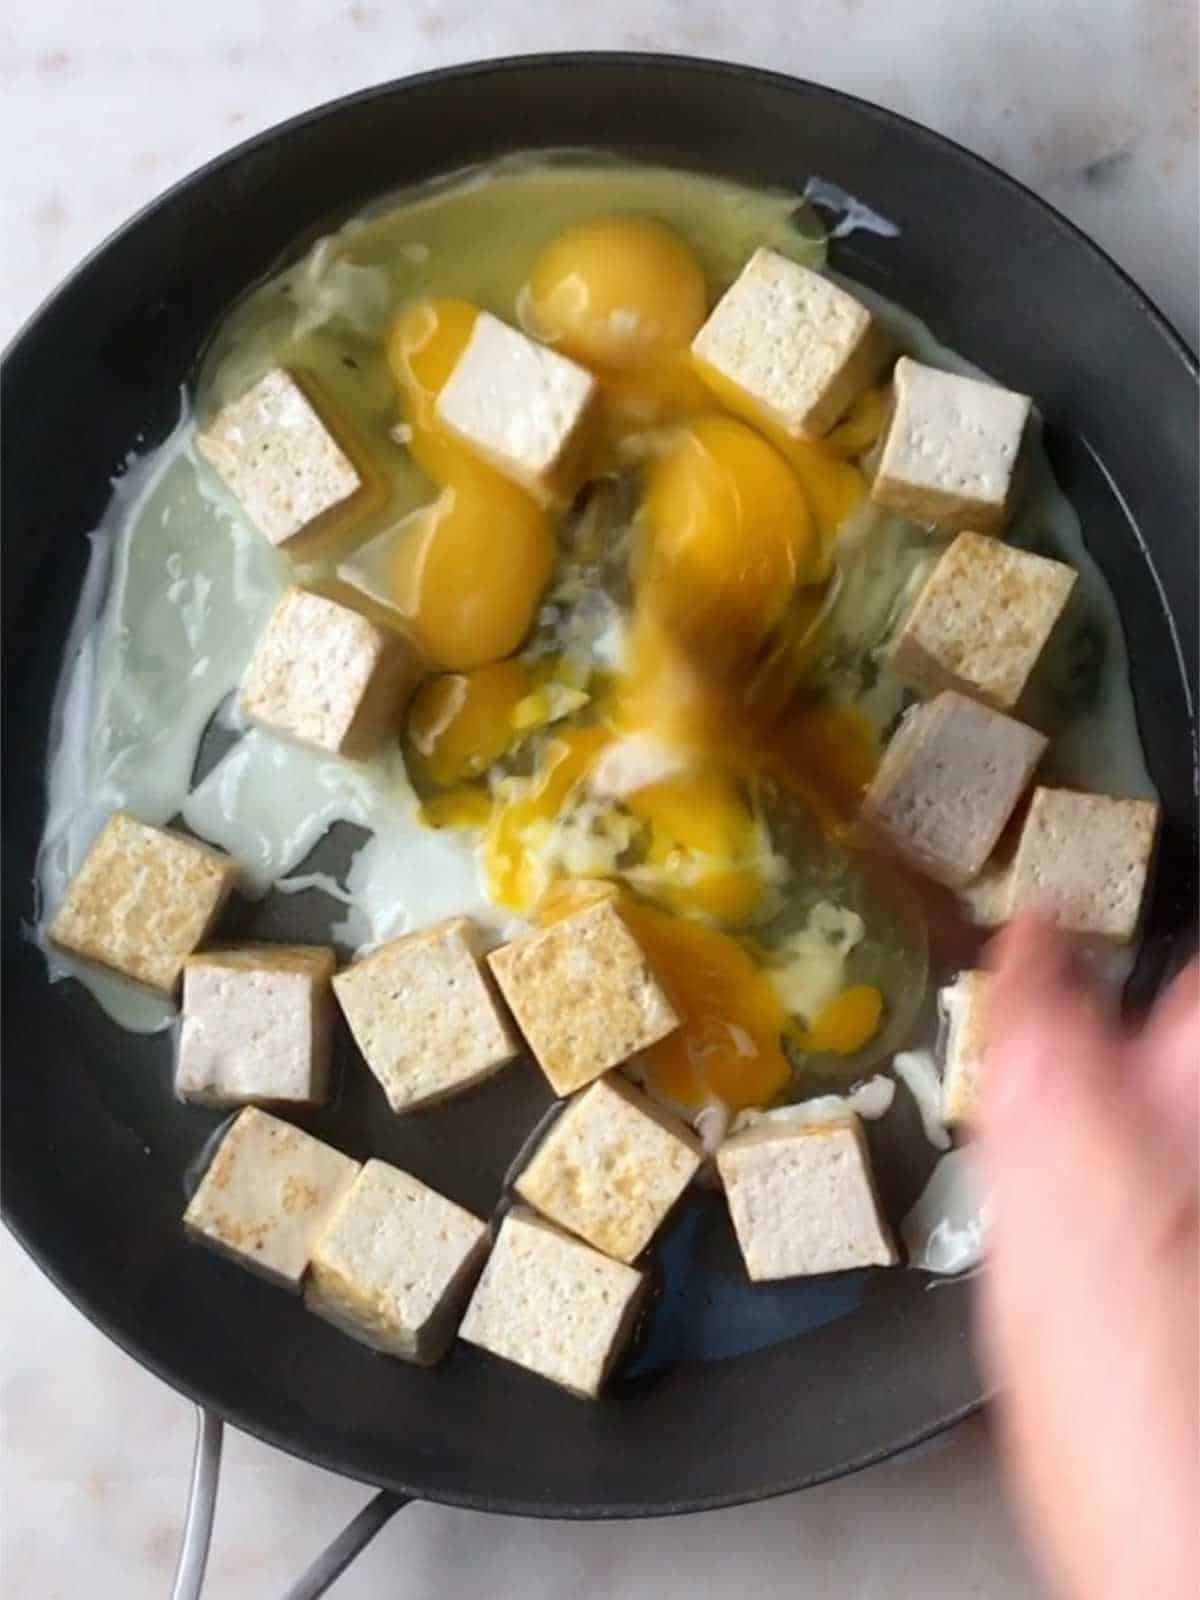 A hand using a wooden spoon to scramble eggs in a pan with tofu cubes.